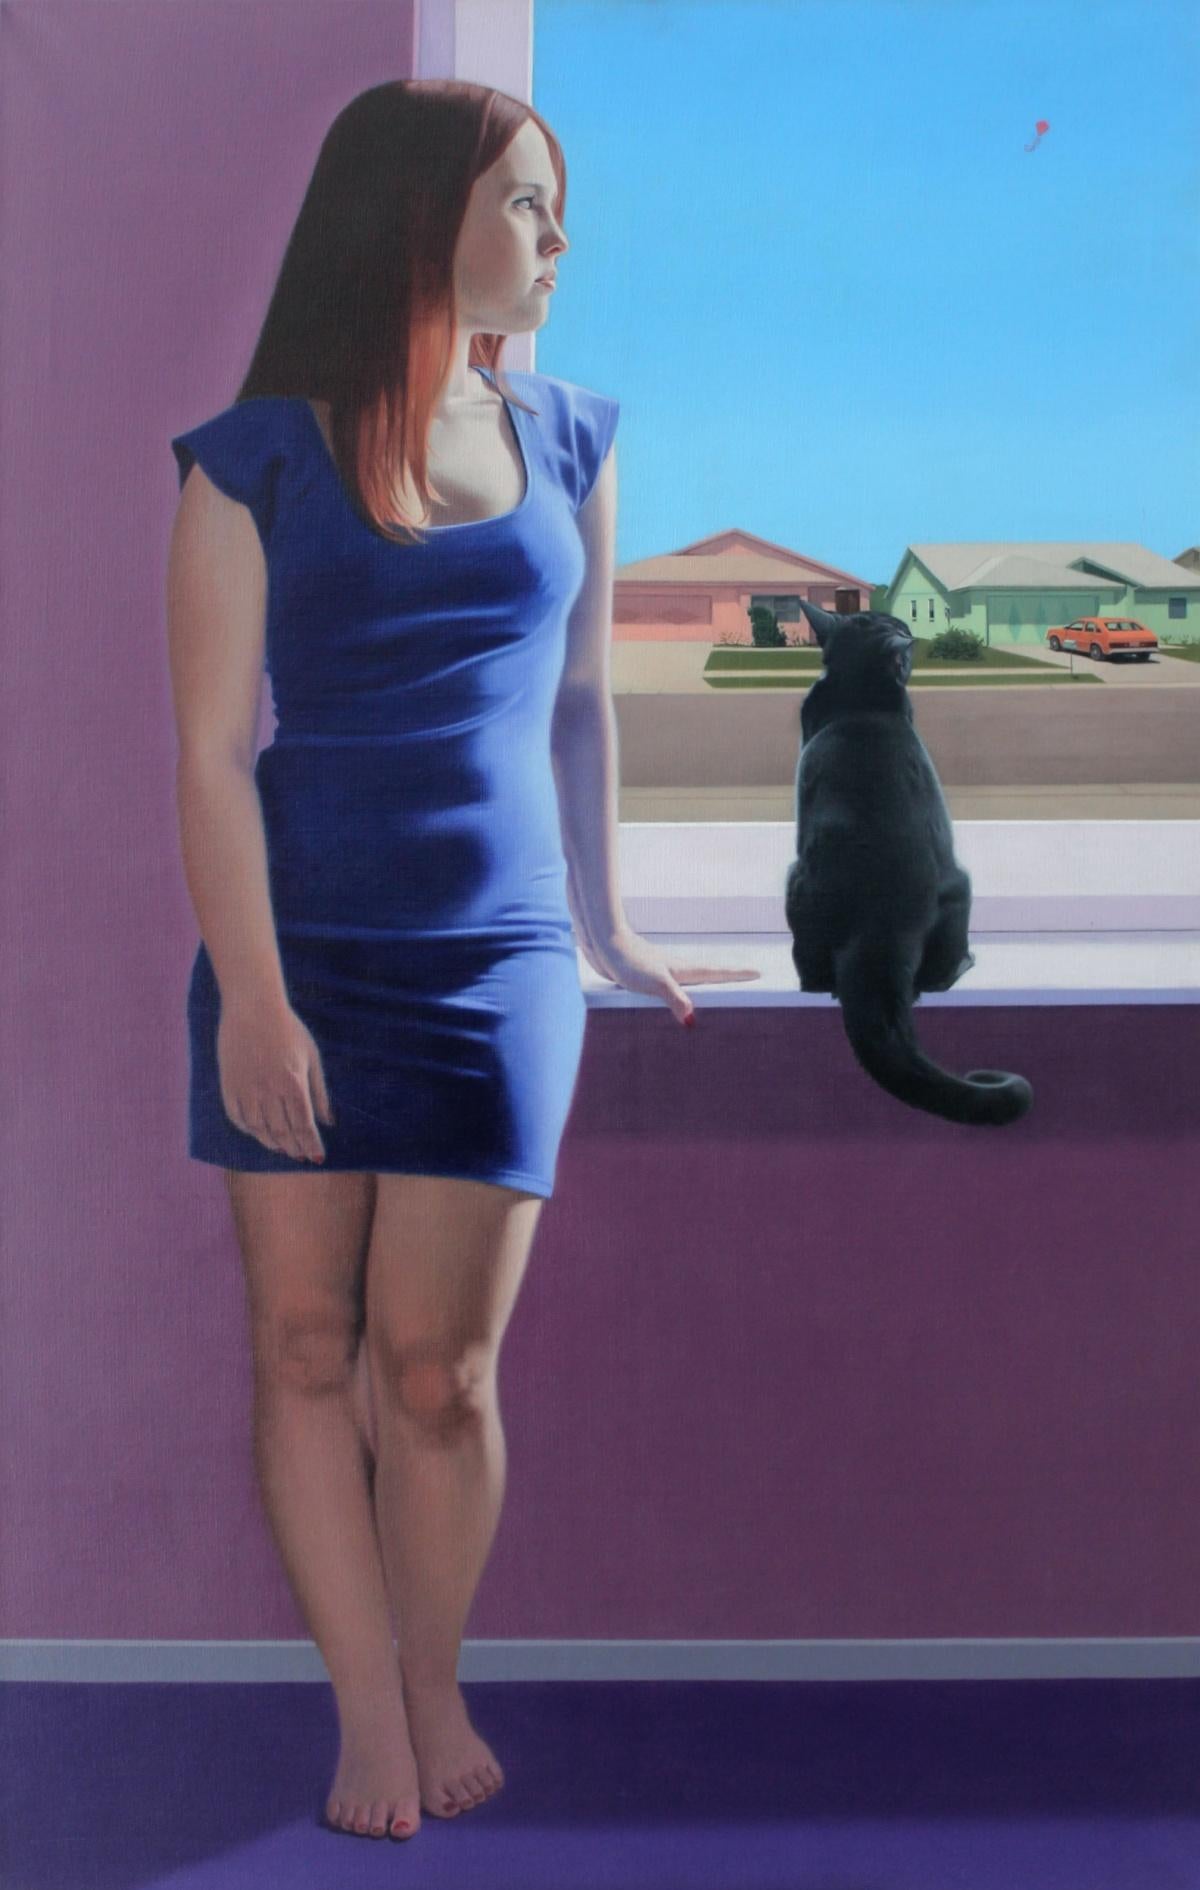 A kite - 21st century, Young art, Figurative painting, Photorealism, A cat